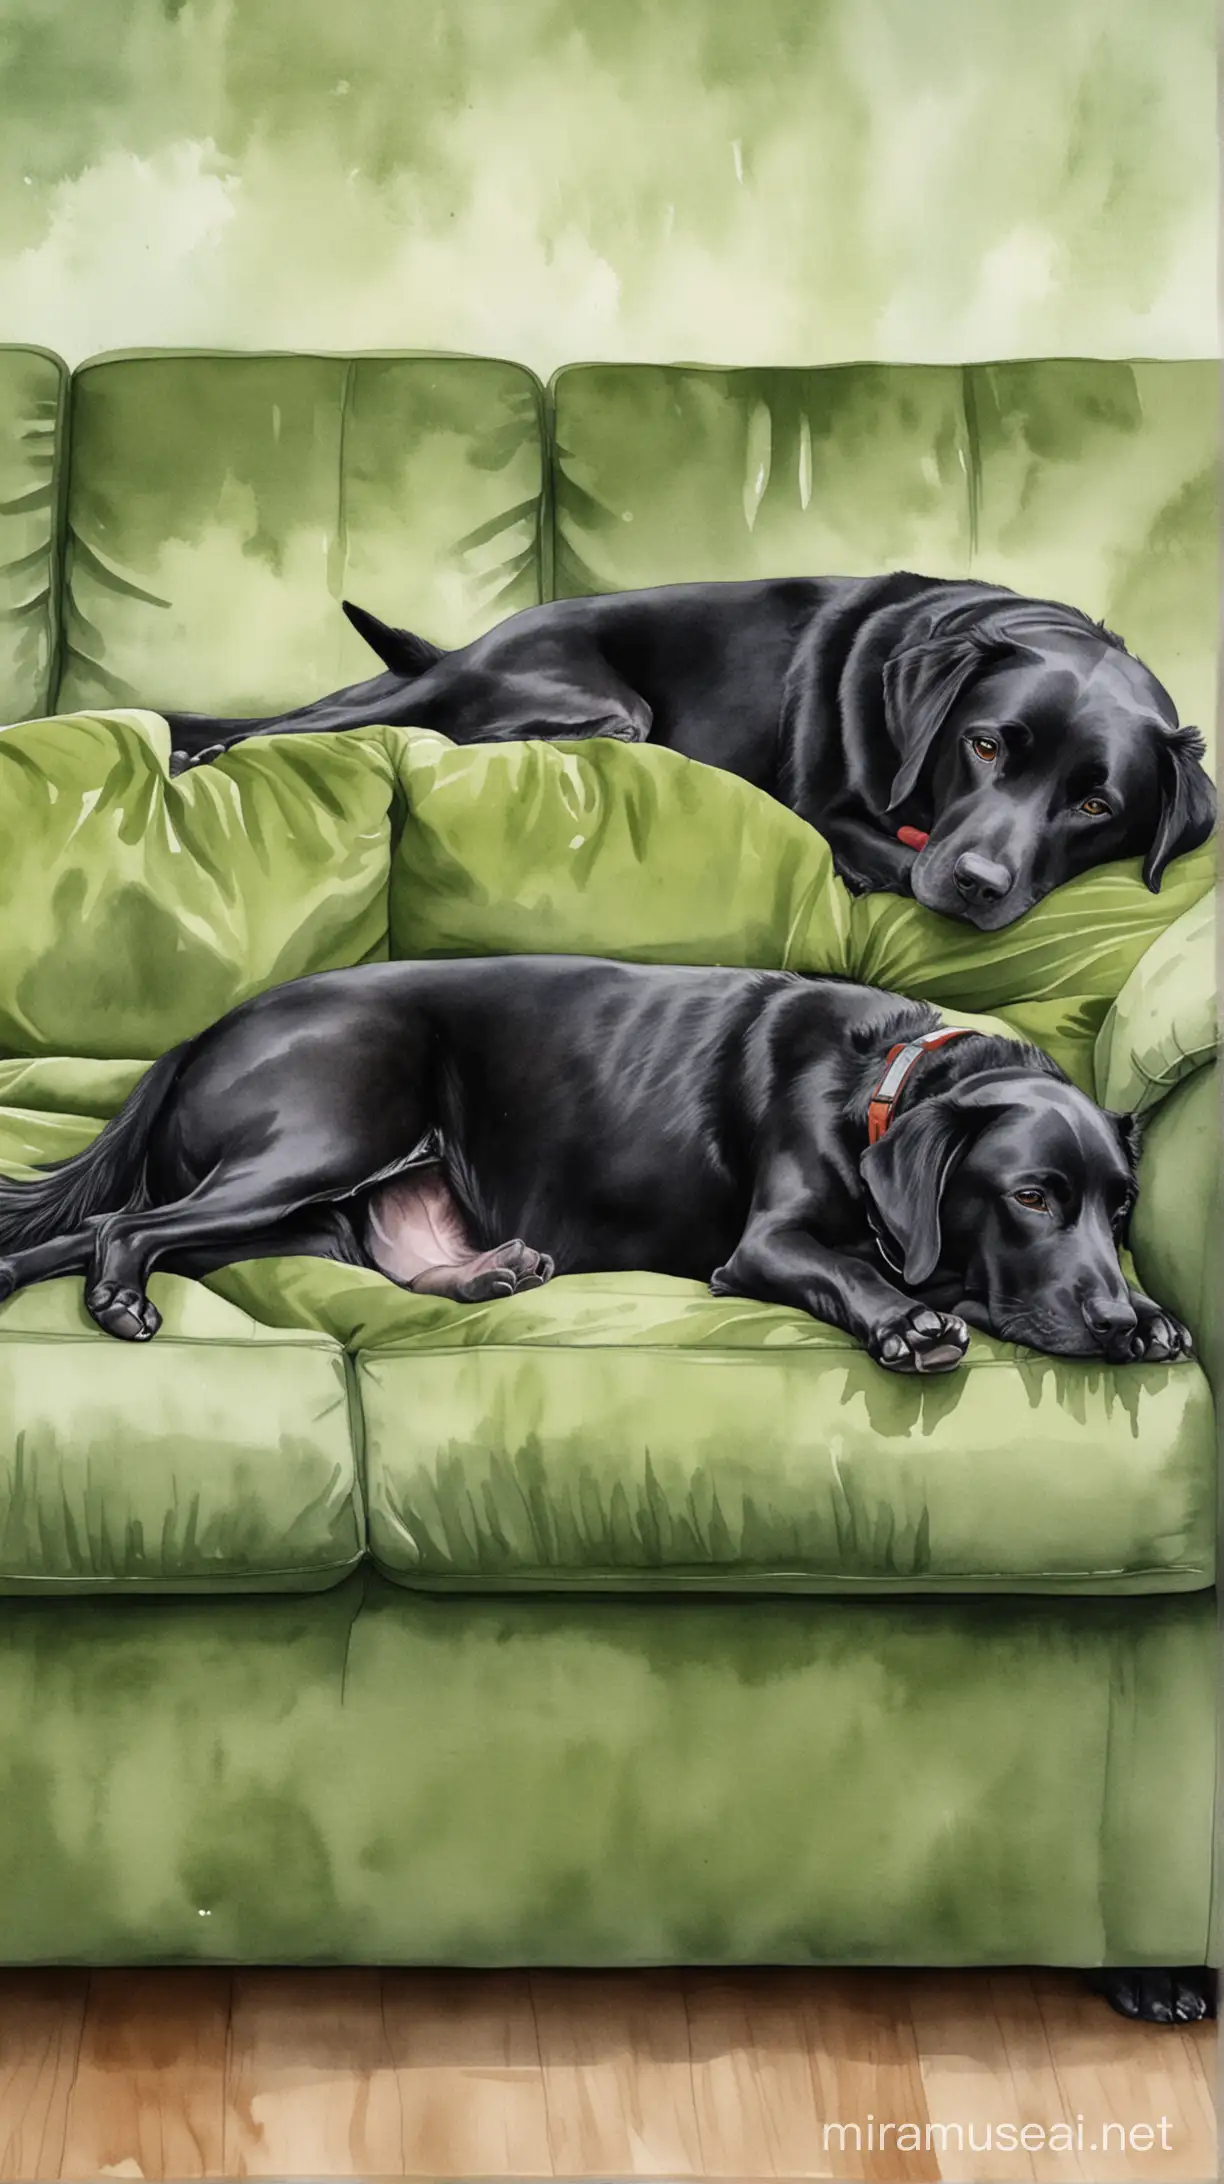 Black Labrador dog sleeping on olive green couch water color